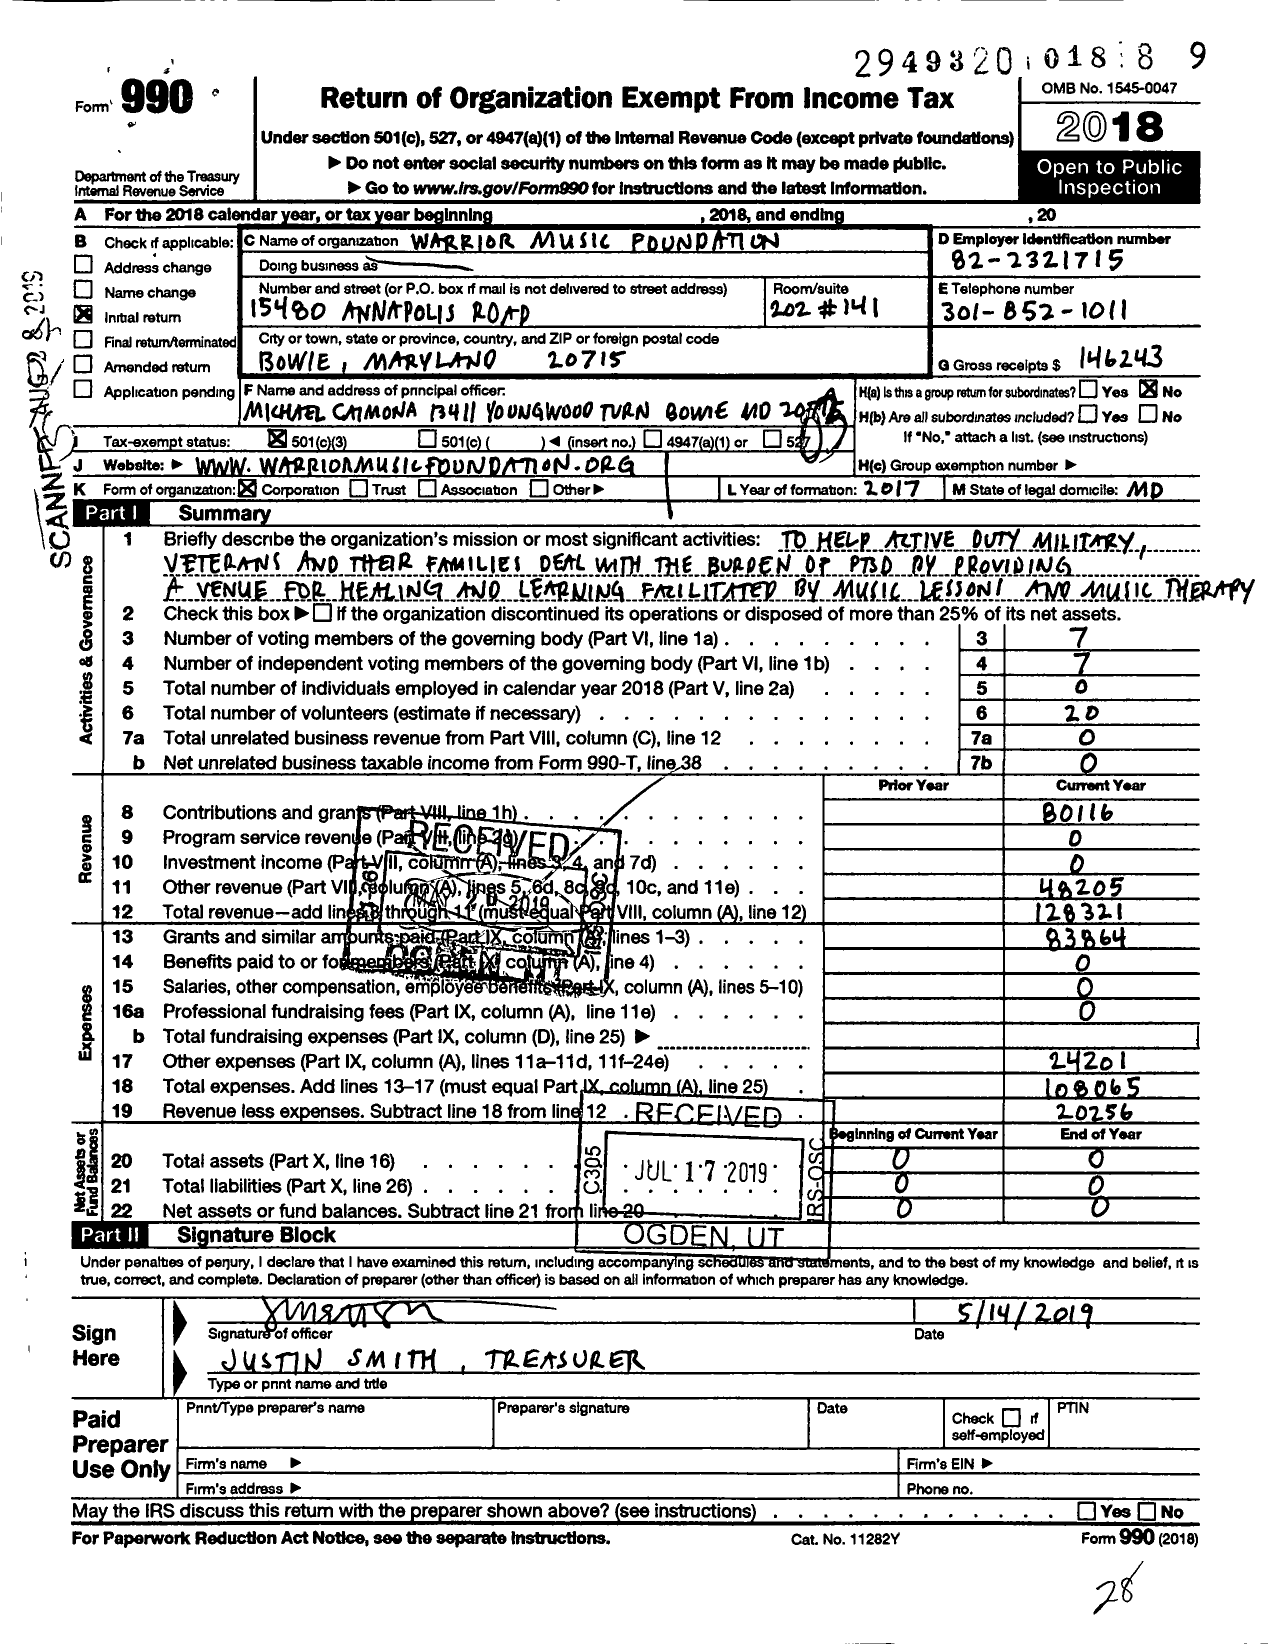 Image of first page of 2018 Form 990 for Warrior Music Foundation